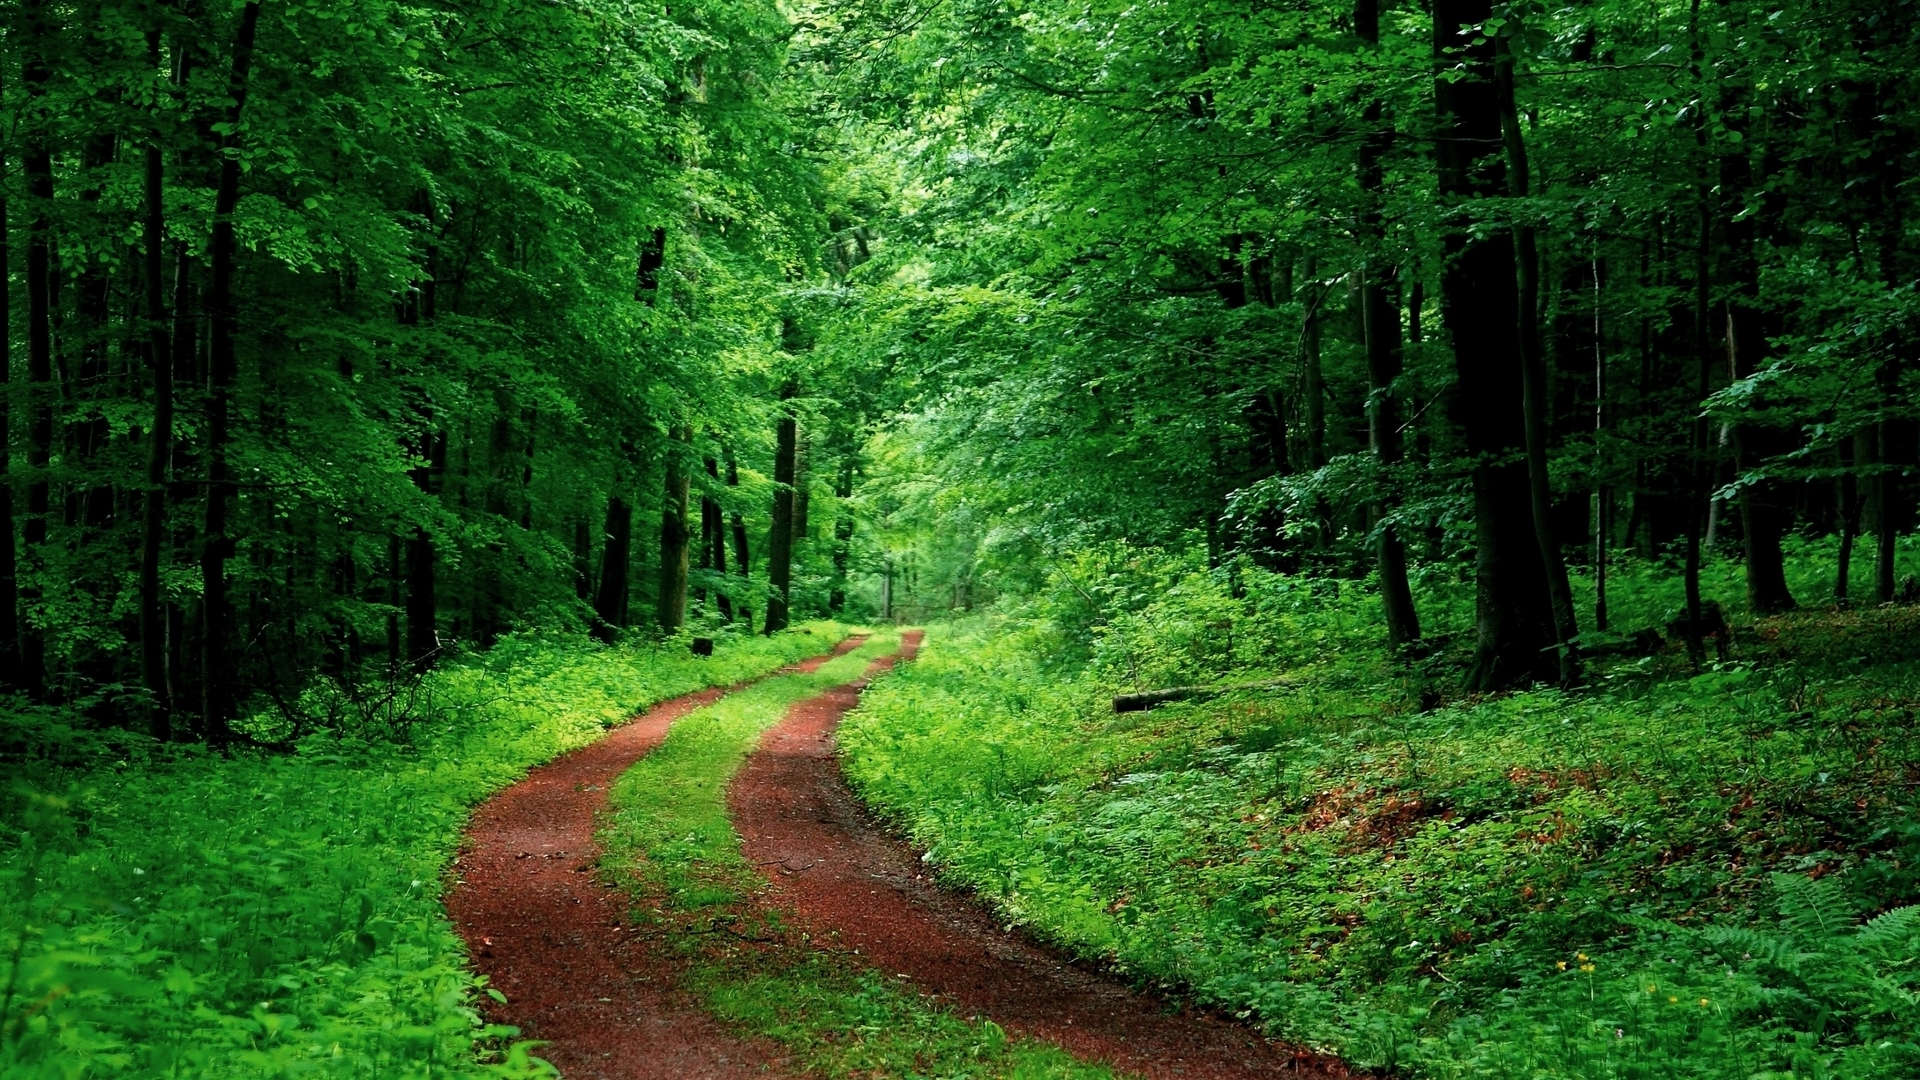 green, vegetation, man made, path, forest, nature, tree wallpaper for mobile